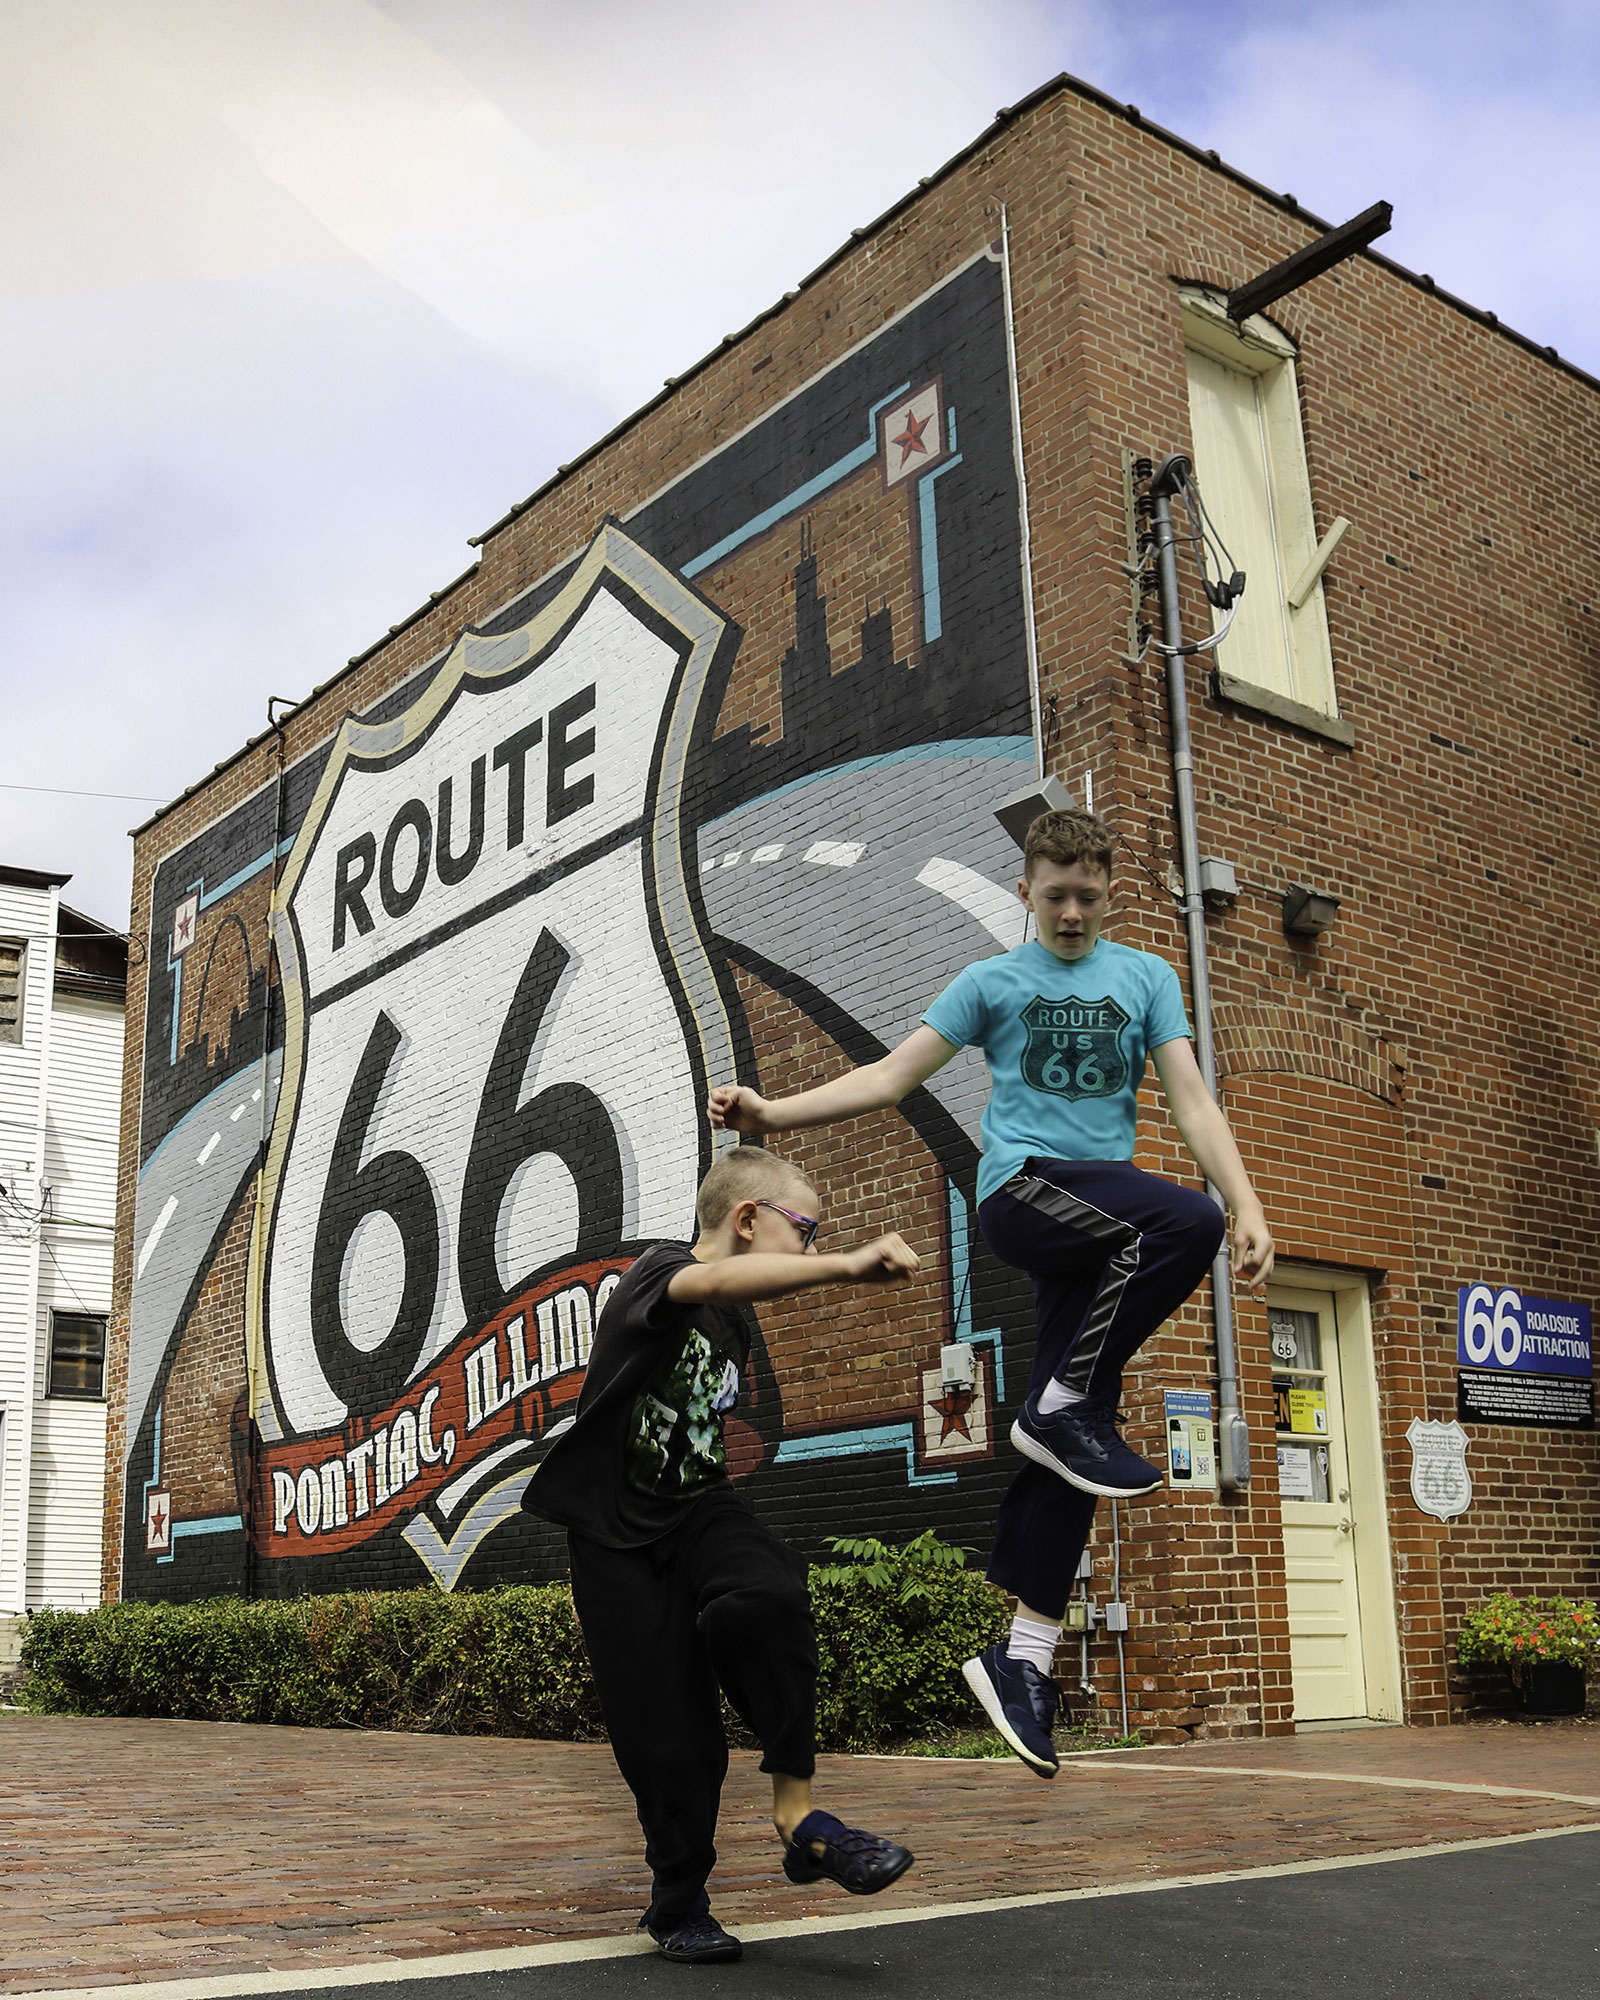 Murals on Main Street Featuring the World's Largest Outdoor Painted Route 66 Shield